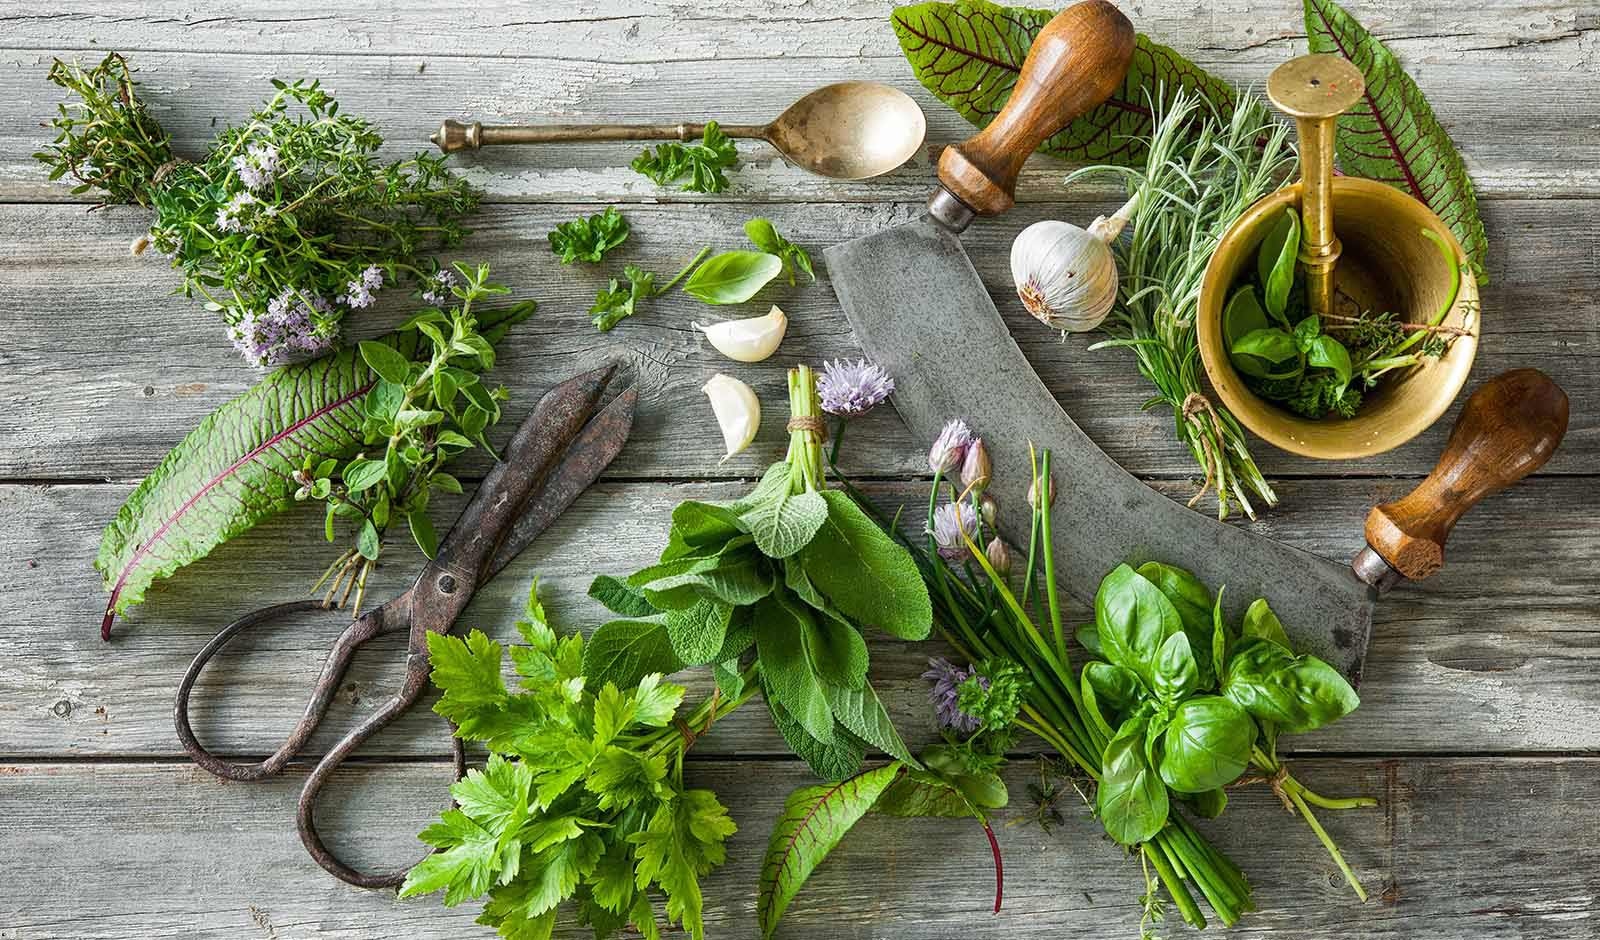 Your own herb garden for amazingly aromatic and useful herbs